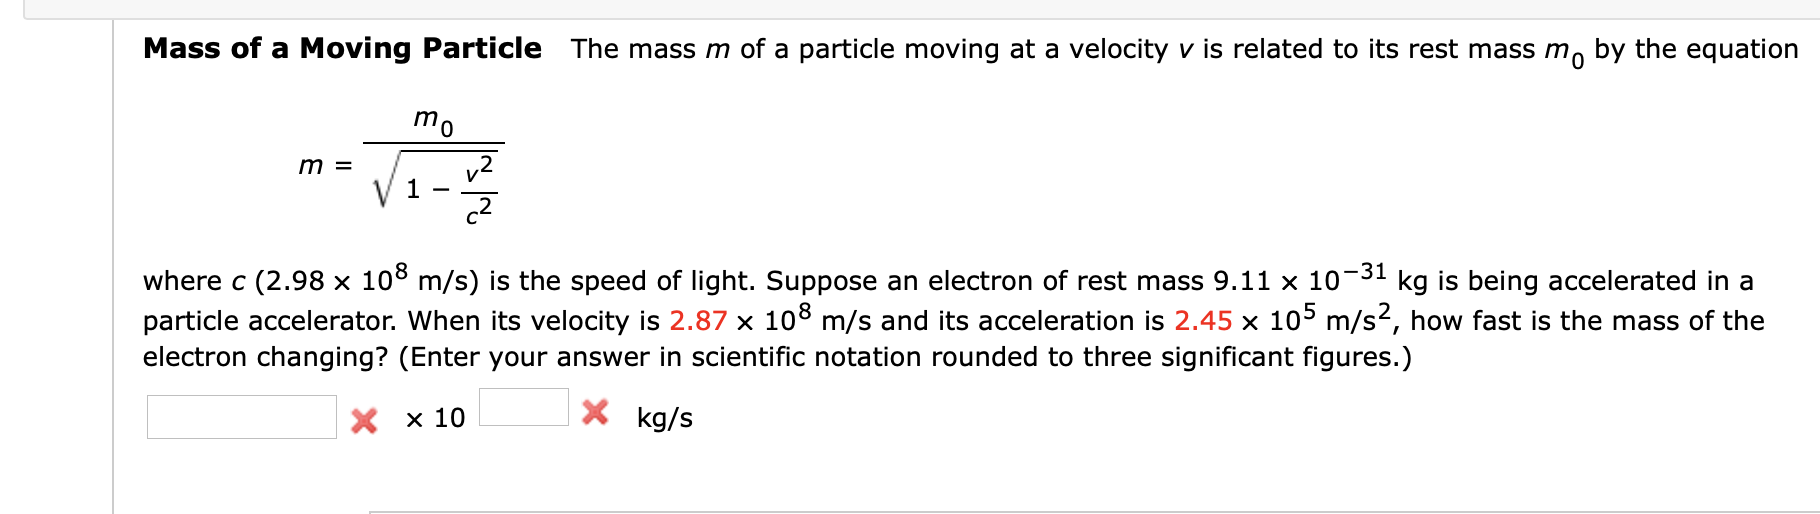 Mass of a Moving Particle The mass m of a particle moving at a velocity v is related to its rest mass m, by the equation
mo
v2
1
c2
m =
-31
kg is being accelerated in a
where c (2.98 x 108 m/s) is the speed of light. Suppose an electron of rest mass 9.11 x 10¬
particle accelerator. When its velocity is 2.87 × 108 m/s and its acceleration is 2.45 x 105 m/s2, how fast is the mass of the
electron changing? (Enter your answer in scientific notation rounded to three significant figures.)
X x 10
X kg/s
